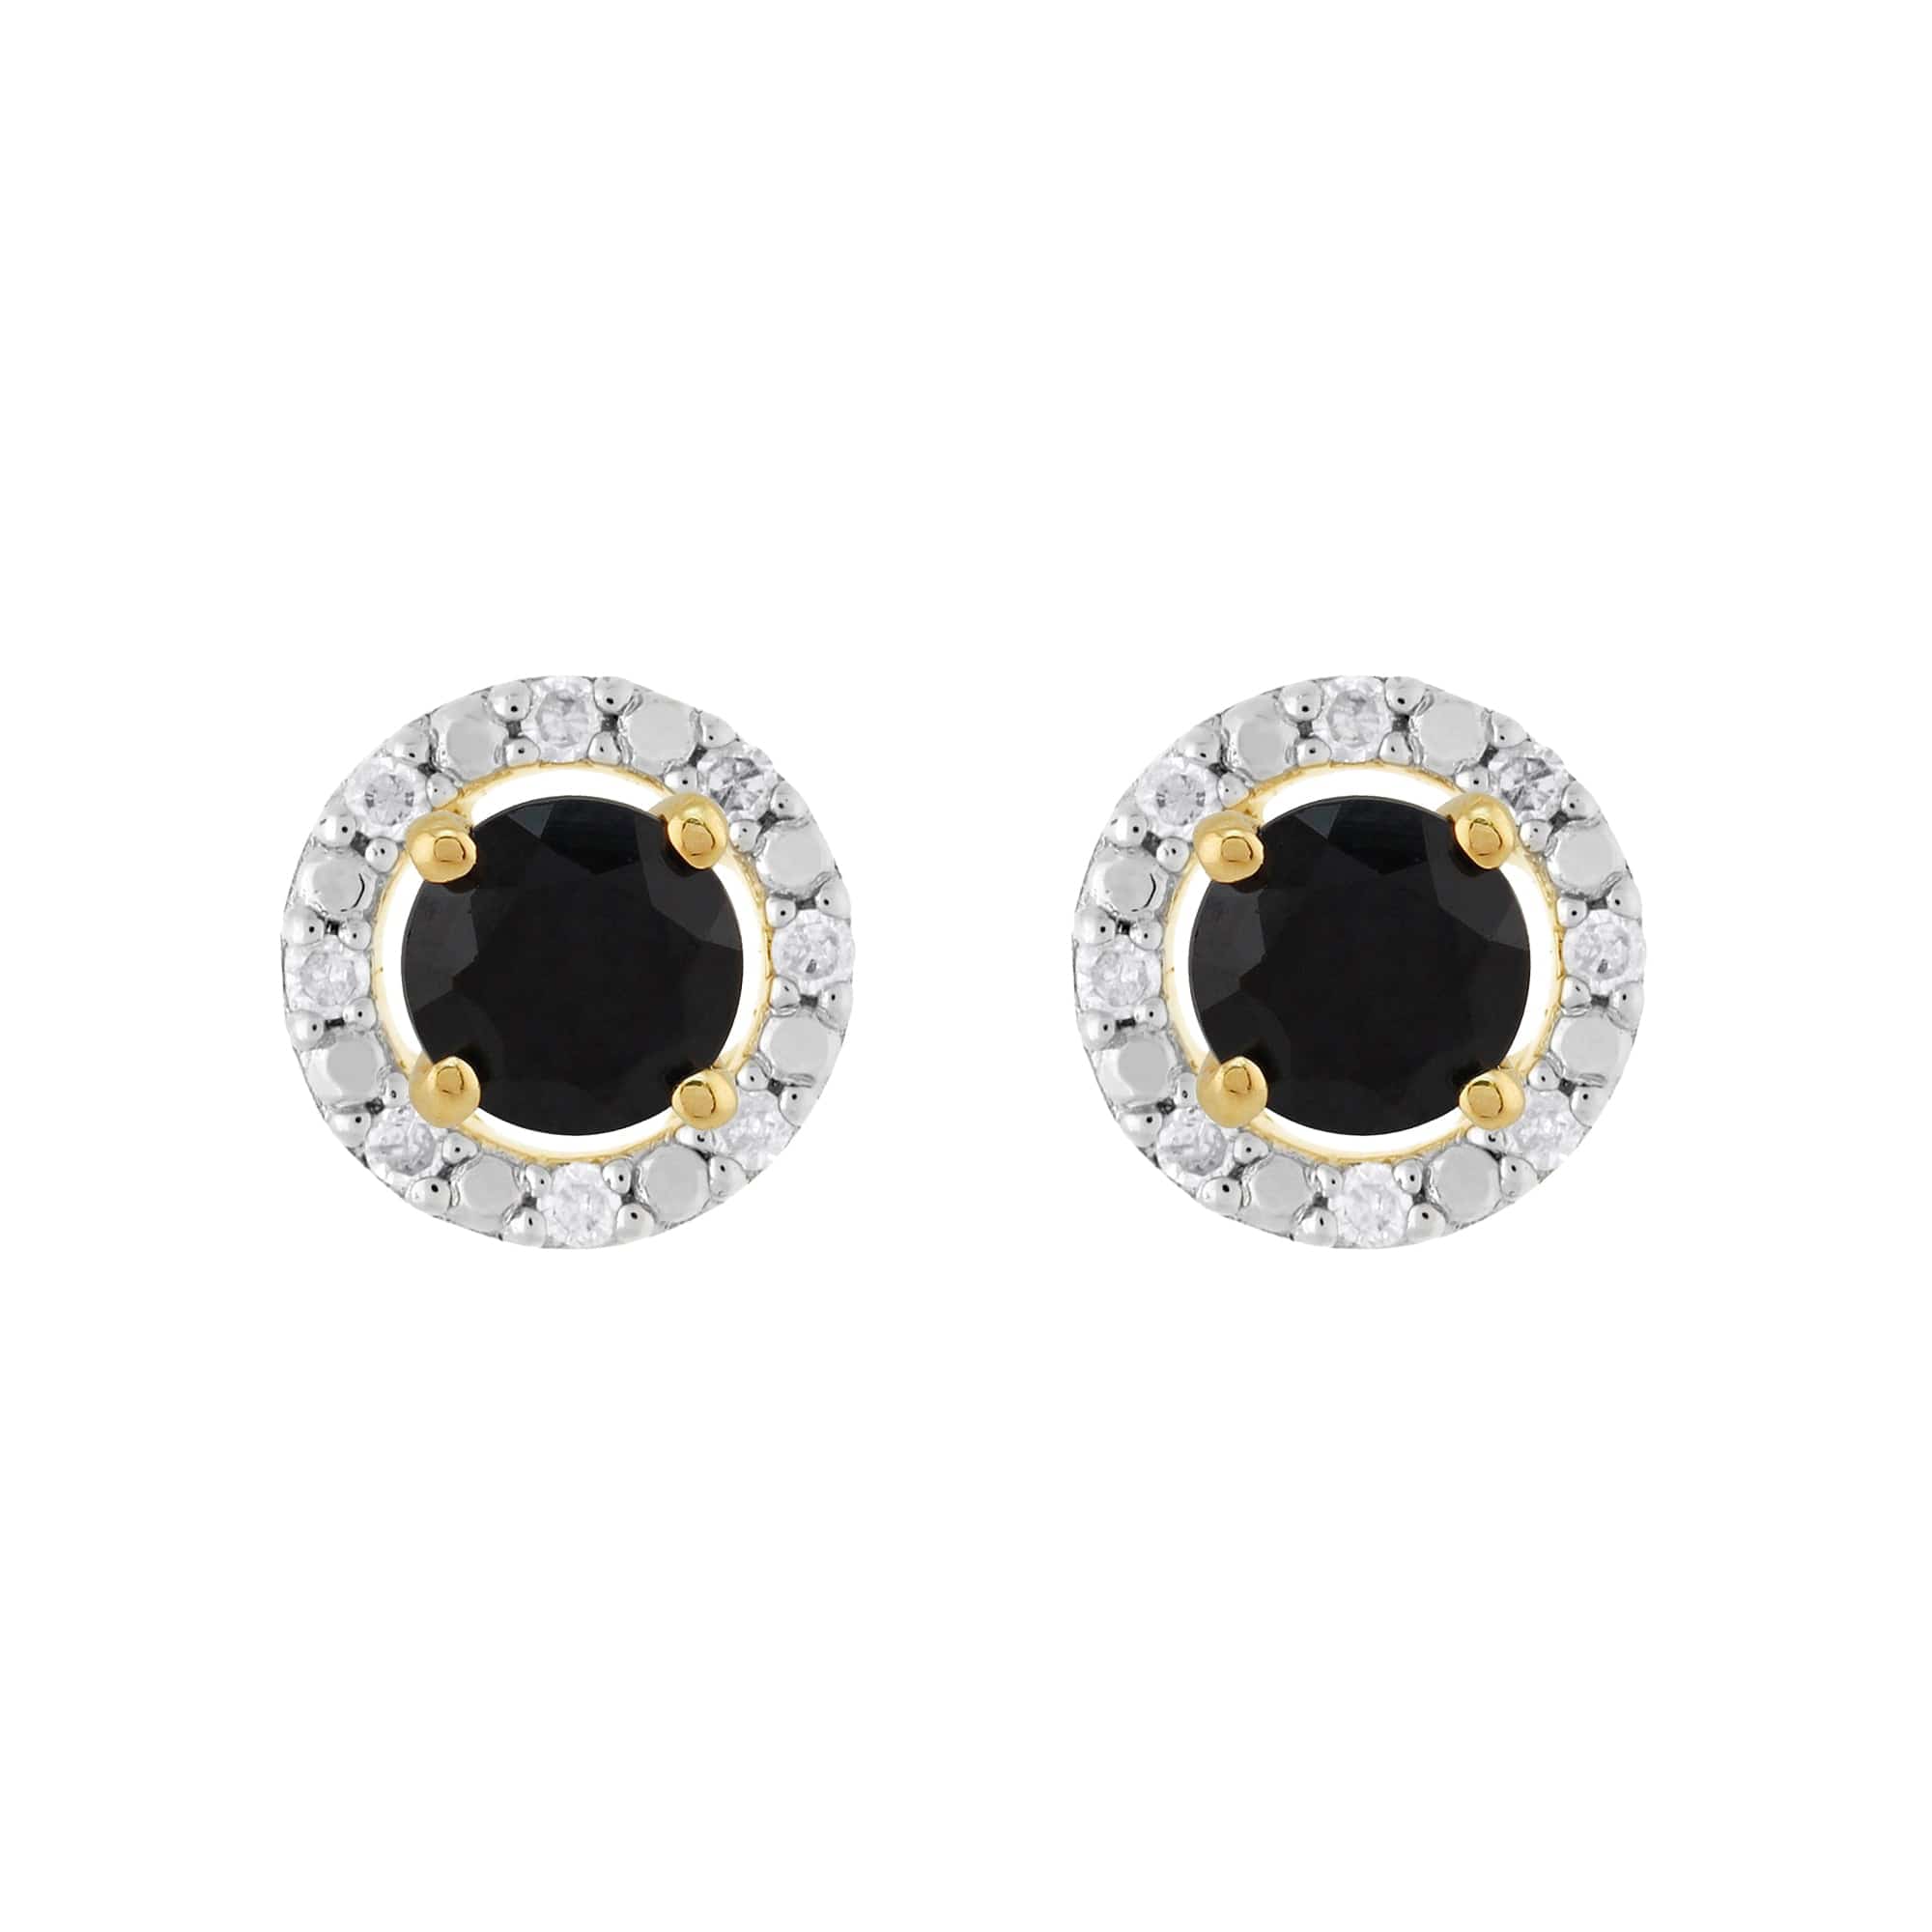 11559-191E0376019 Classic Round Dark Blue Sapphire Stud Earrings with Detachable Diamond Round Earrings Jacket Set in 9ct Yellow Gold 1